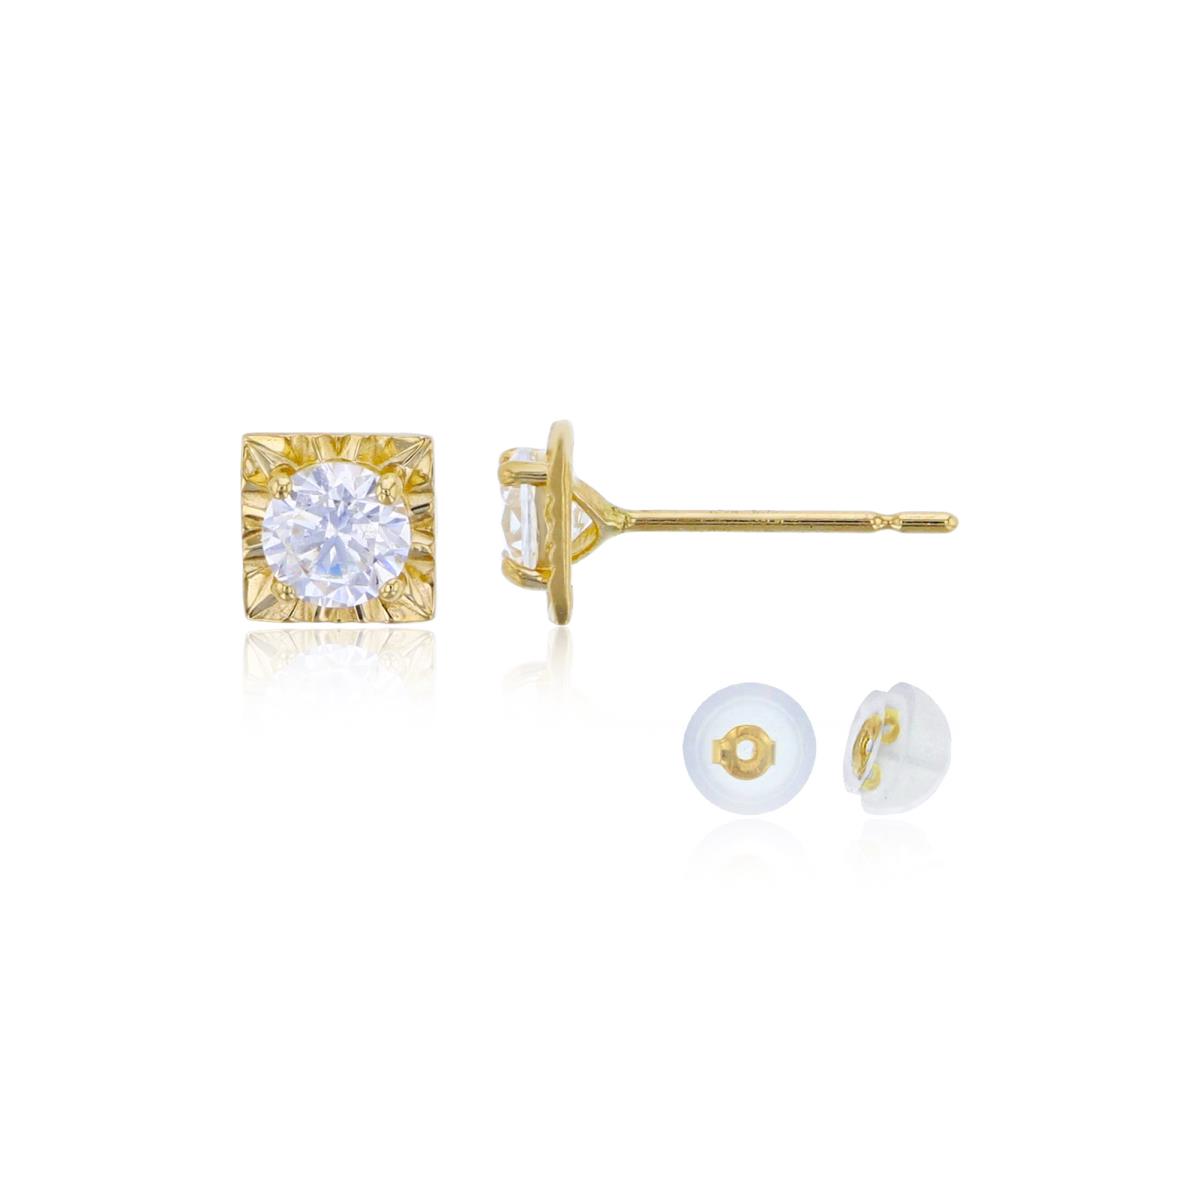 10K Yellow Gold 4mm Round Cut CZ with Diamond Cut Square Stud Earring with Silicone Back